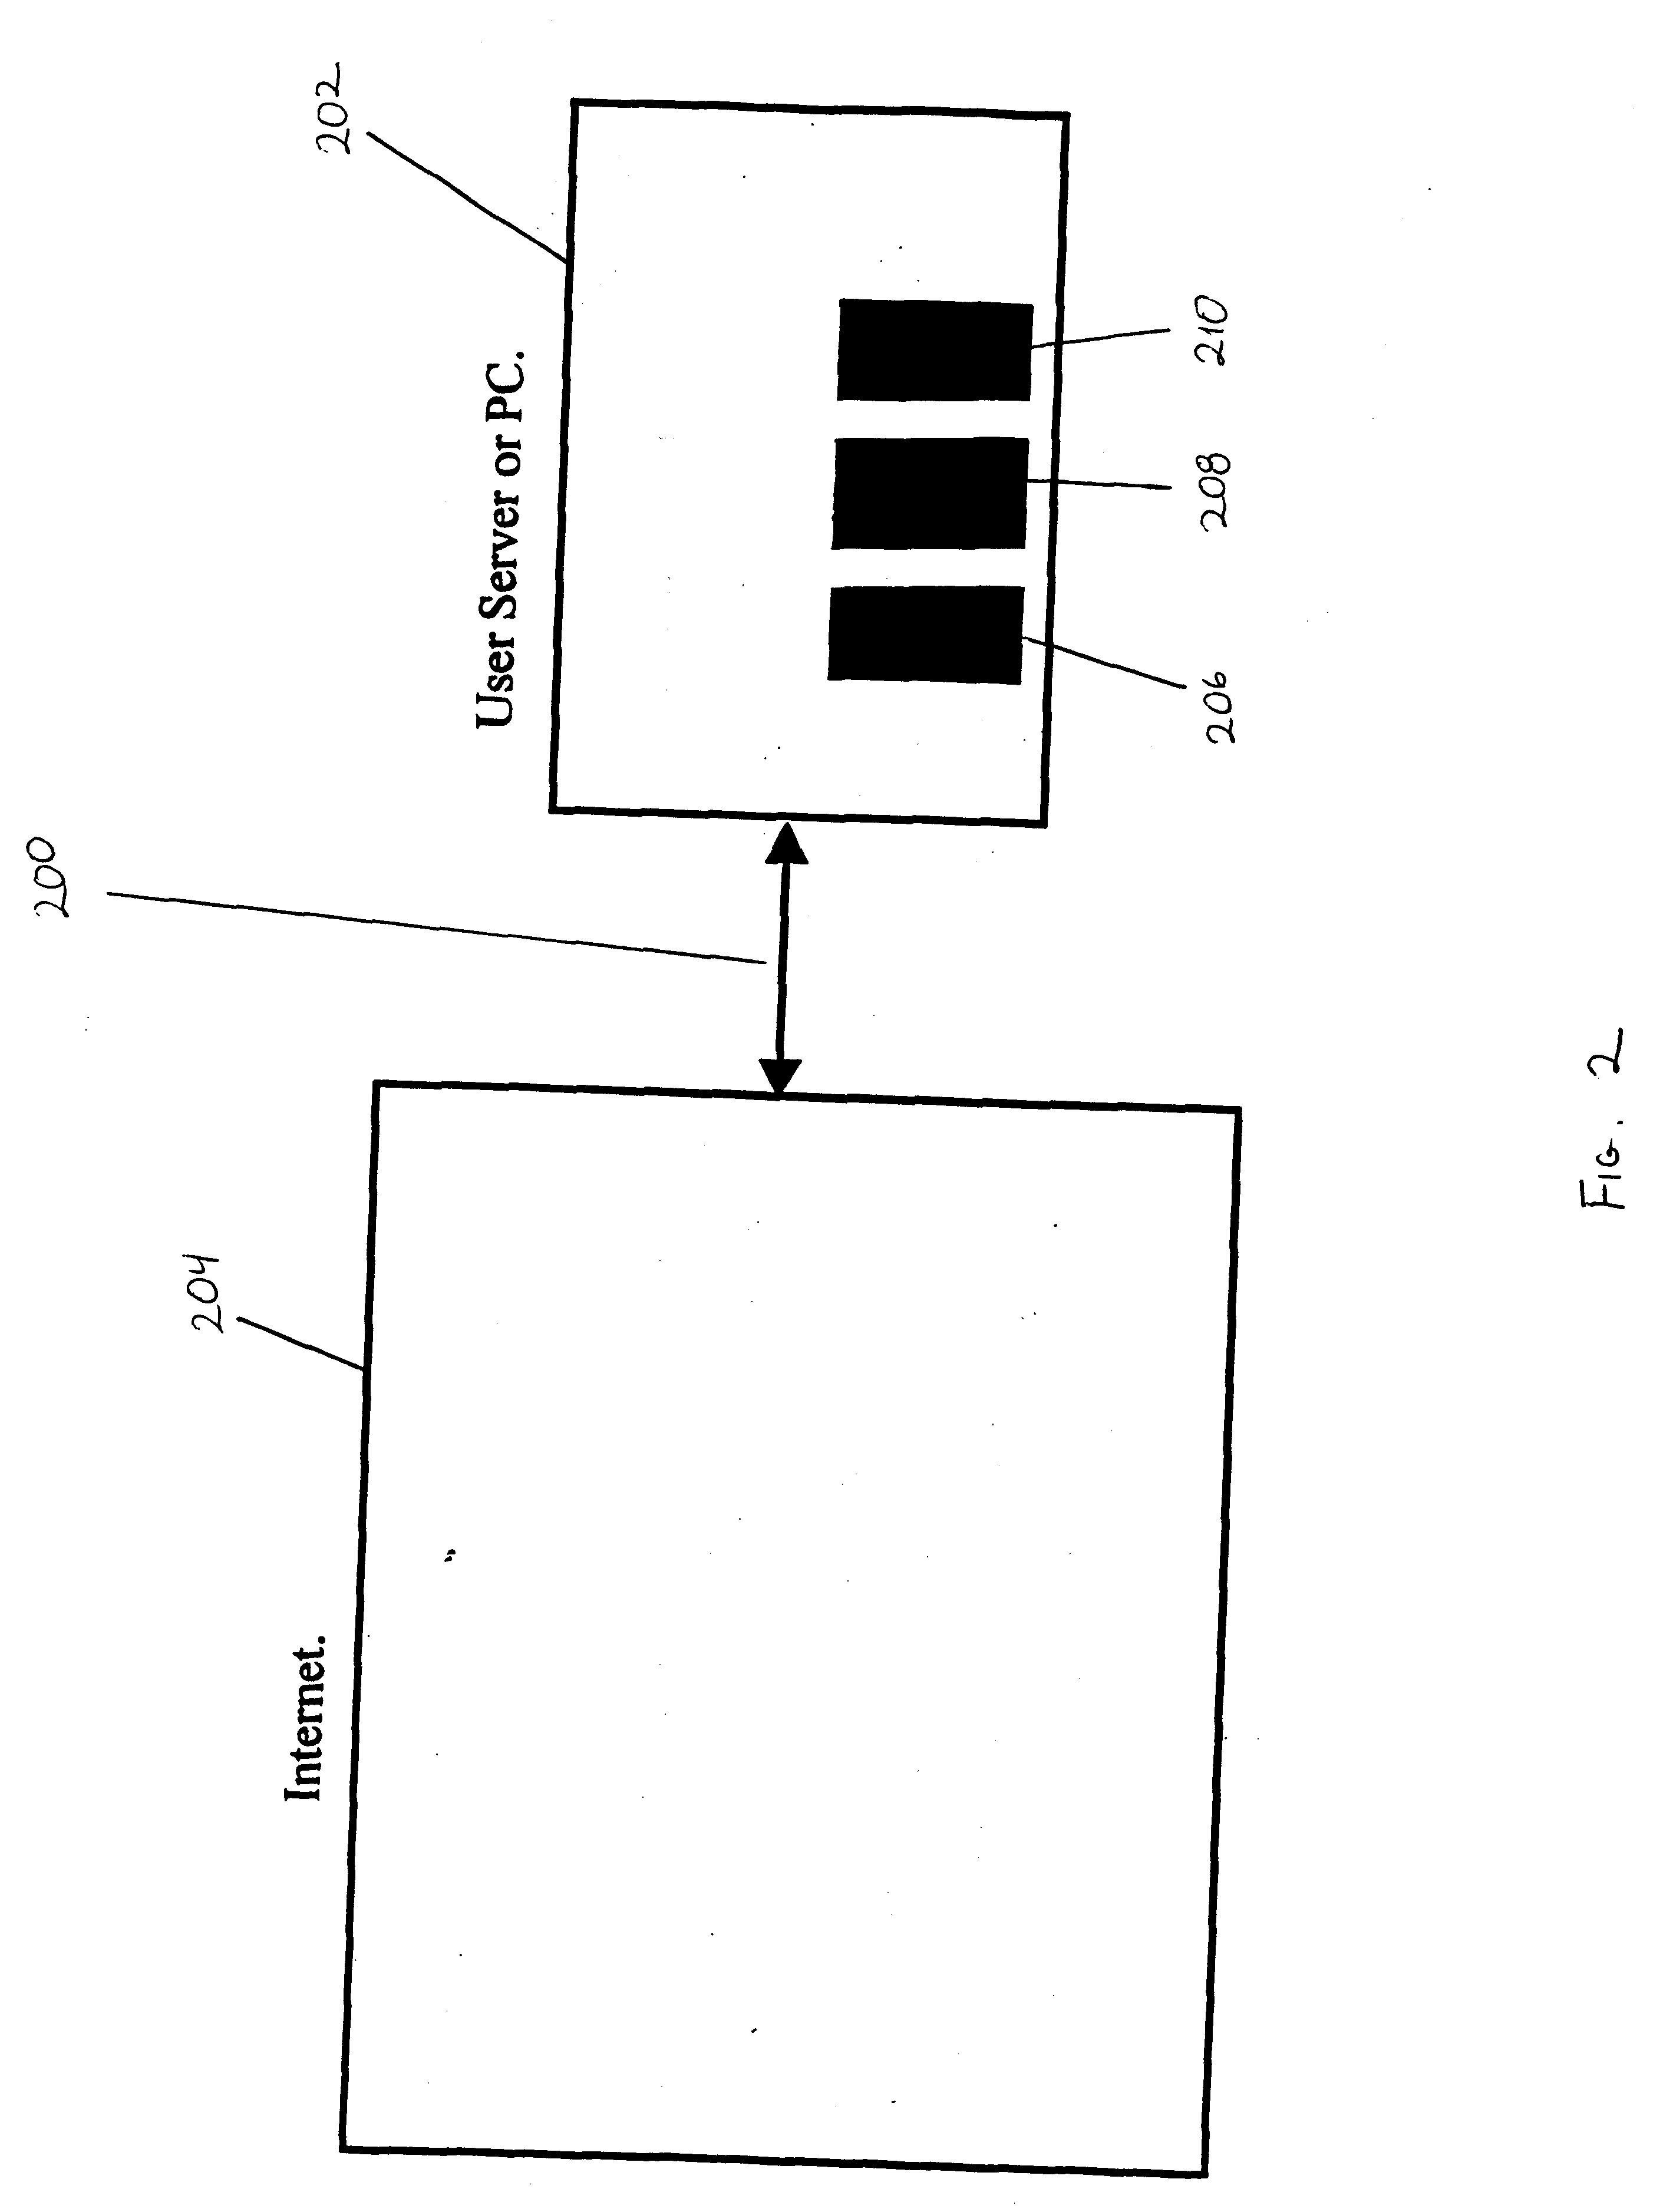 Method and apparatus for image identification and comparison